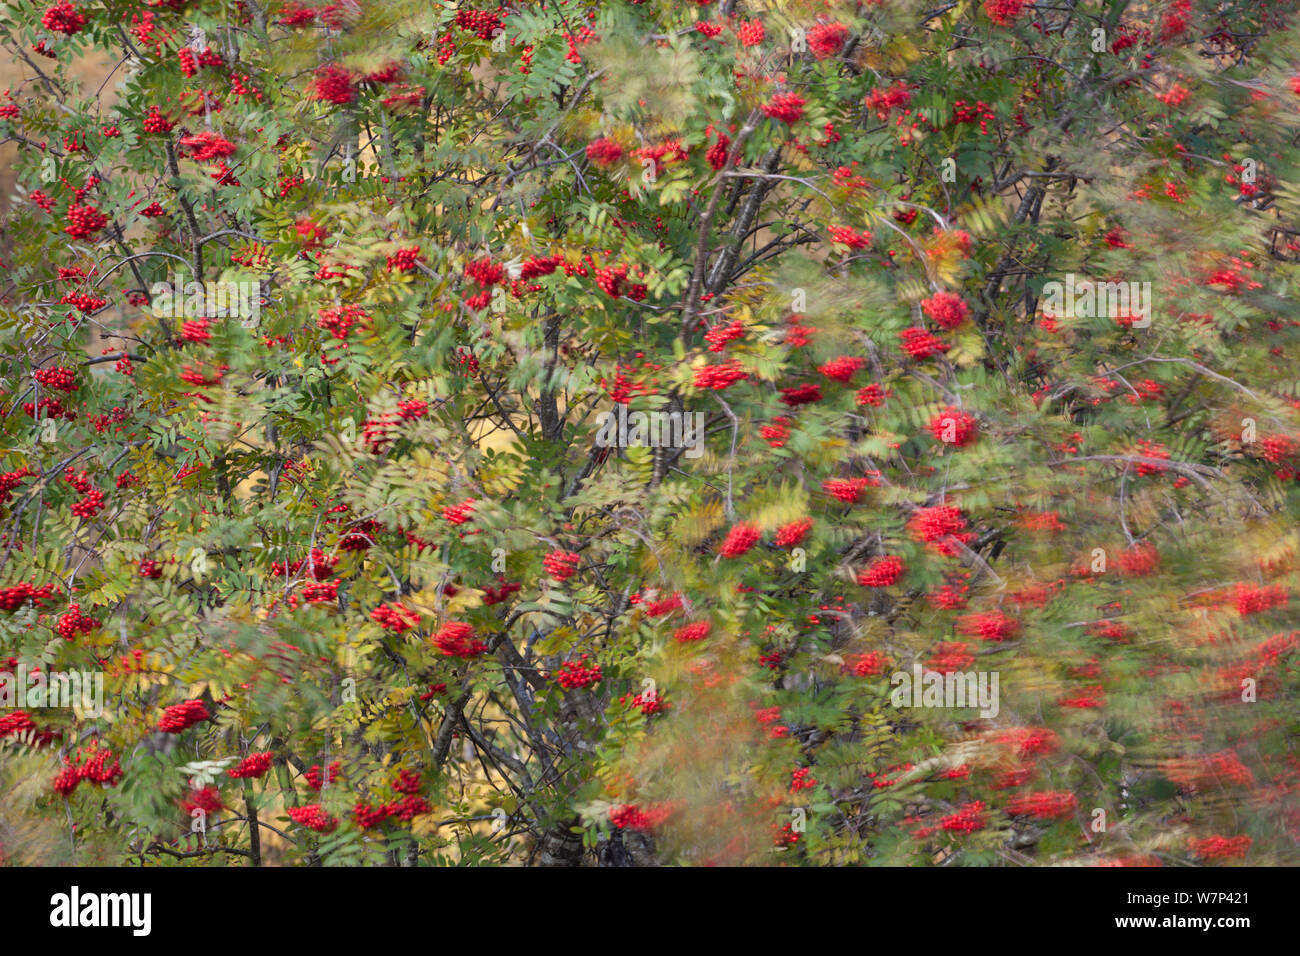 Rowan tree (Corbus aucuparia) moving in wind, with berries, Glenfeshie, Cairngorms National Park, Scotland, UK, October. Stock Photo